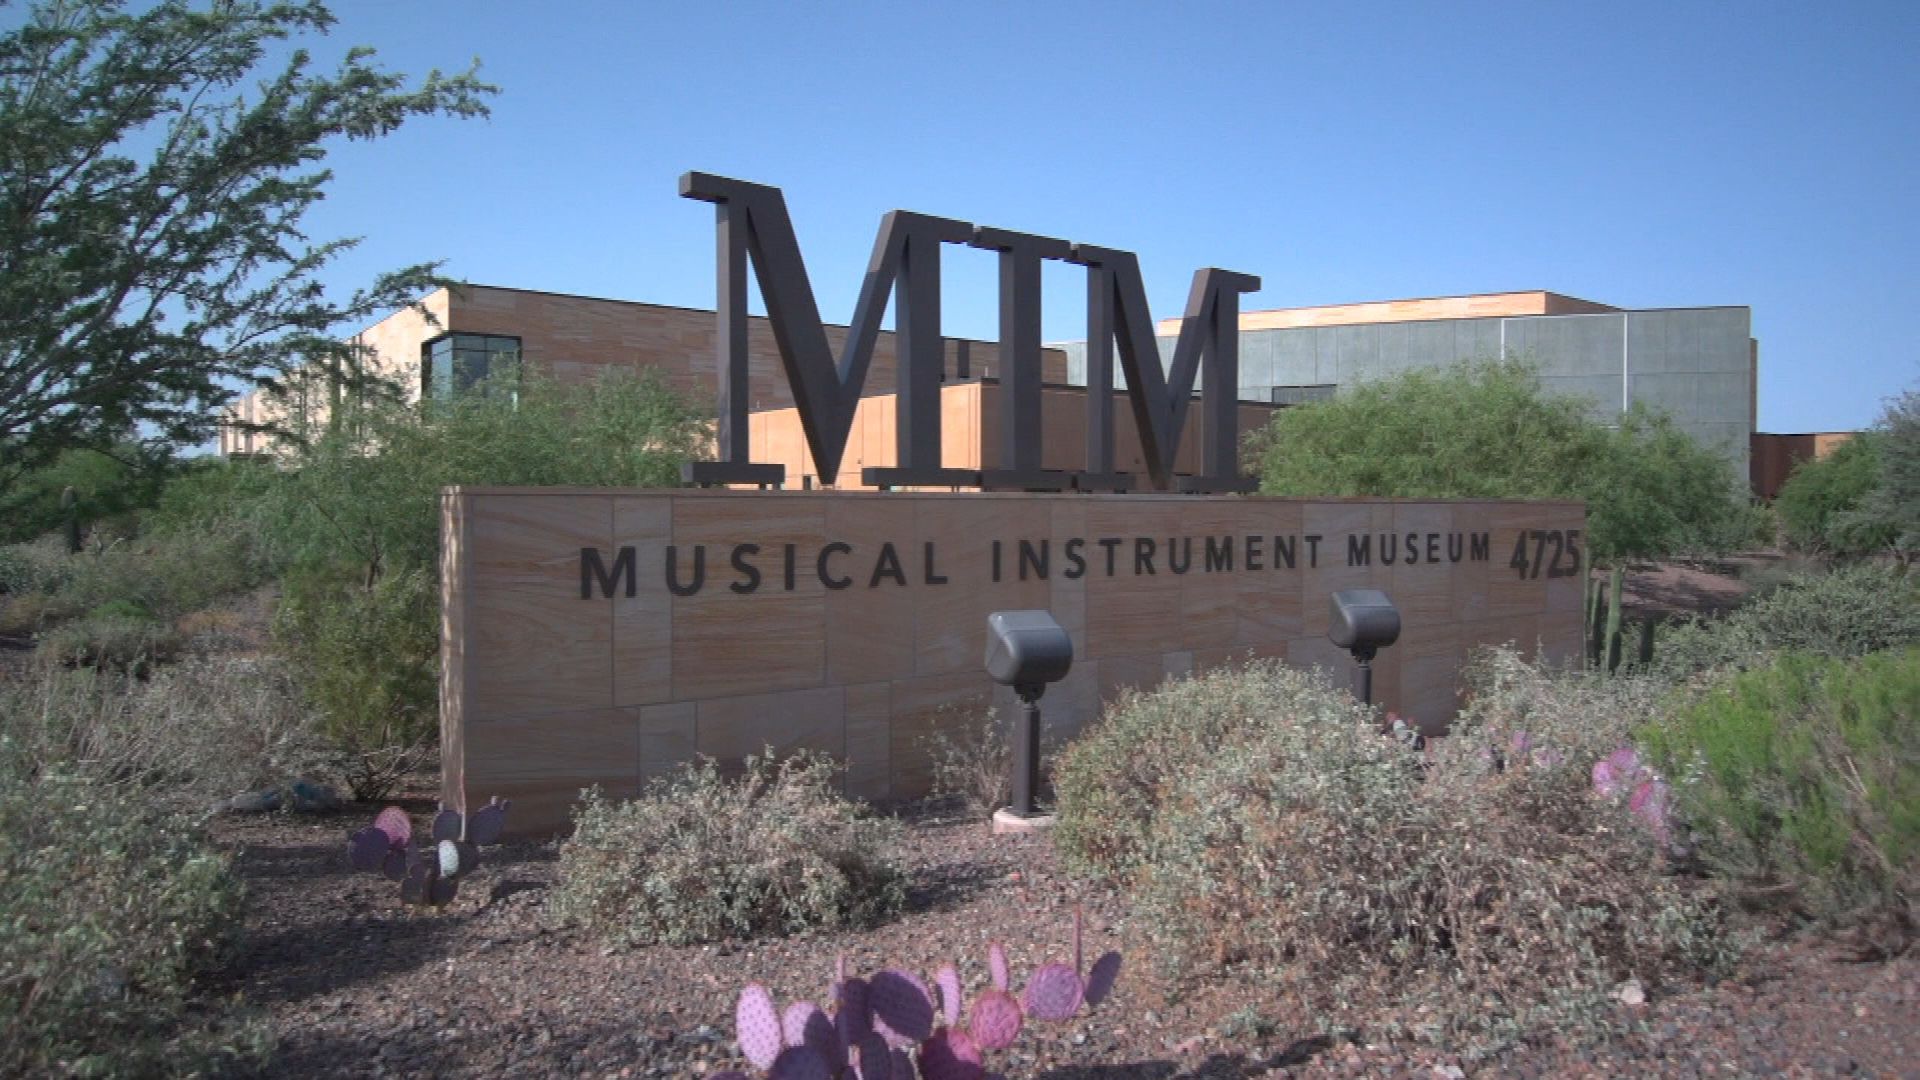 The Musical Instrument Museum